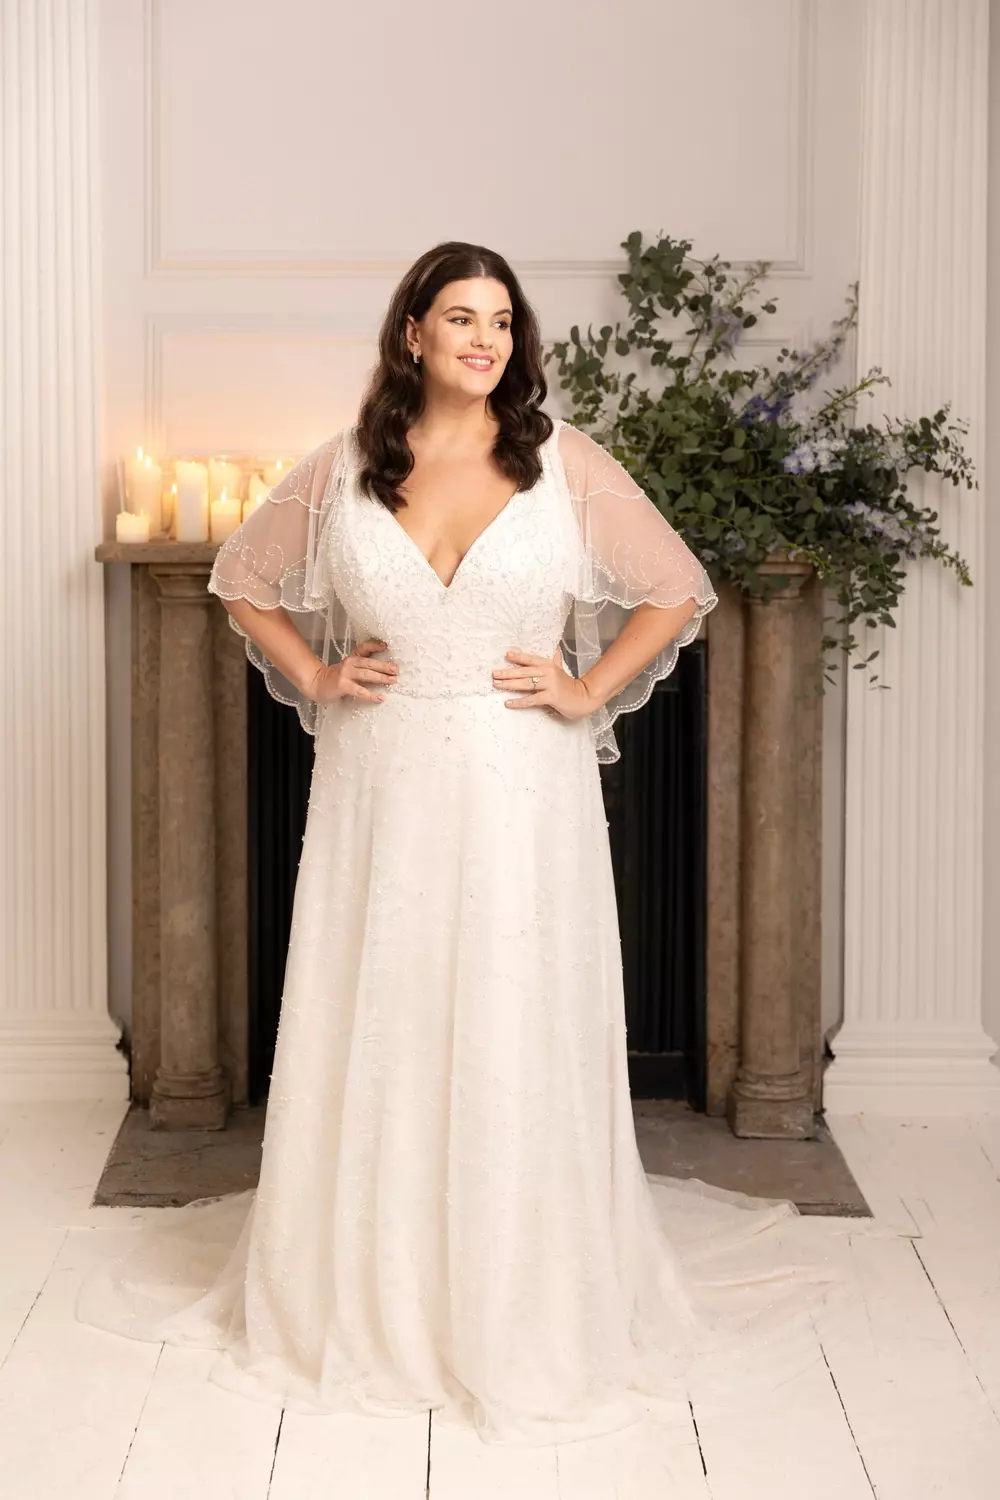 Designers stocked at Smart Brides for Wedding Dresses in Portlaoise